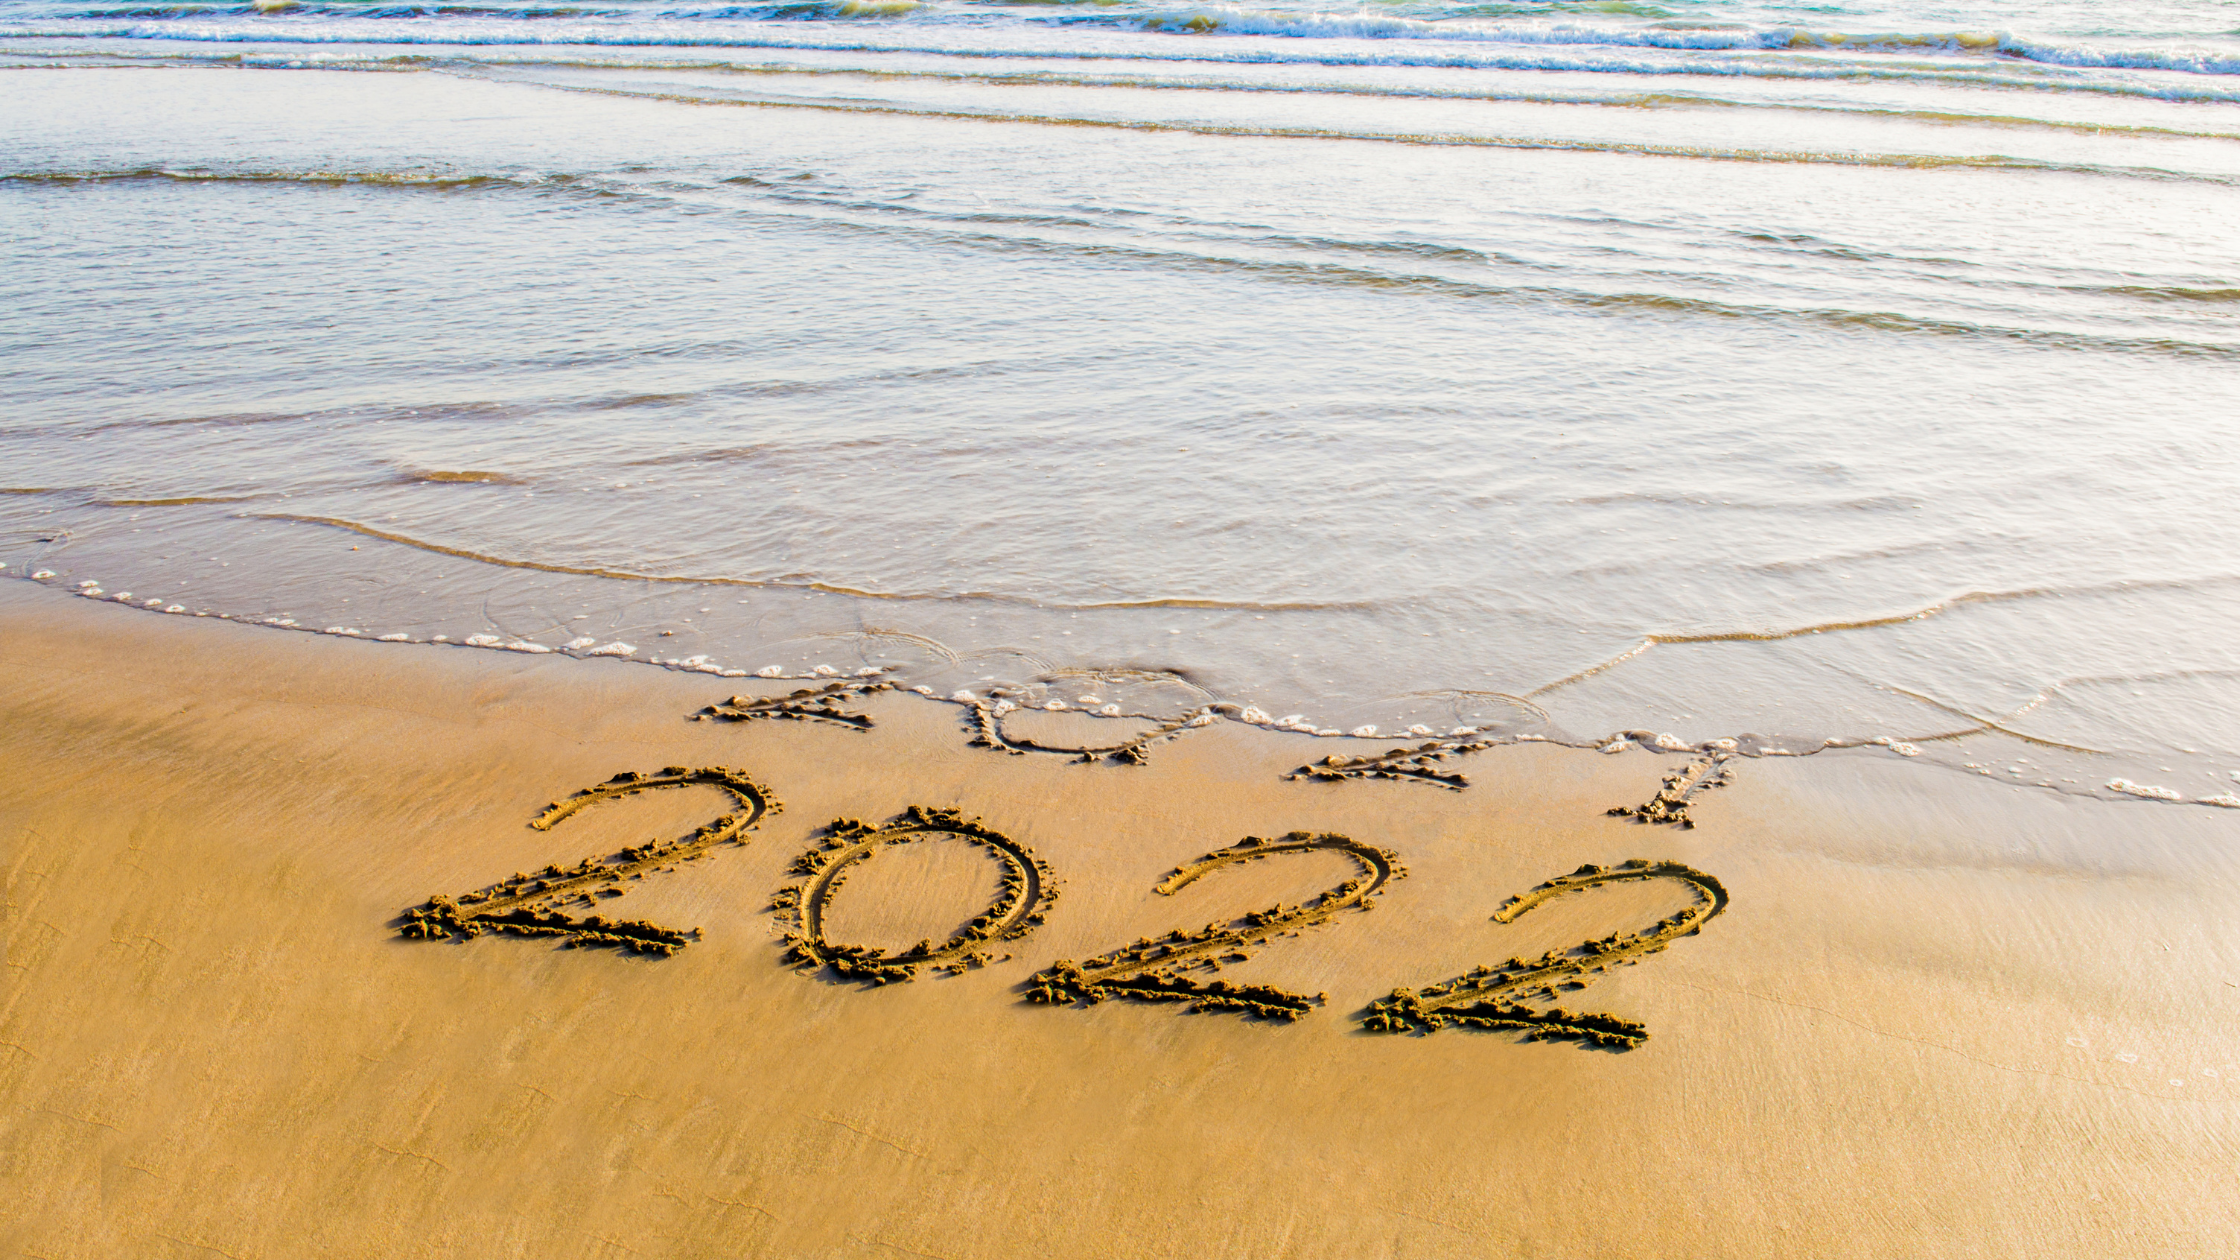 ocean washing away 2021 with 2022 written in the sand